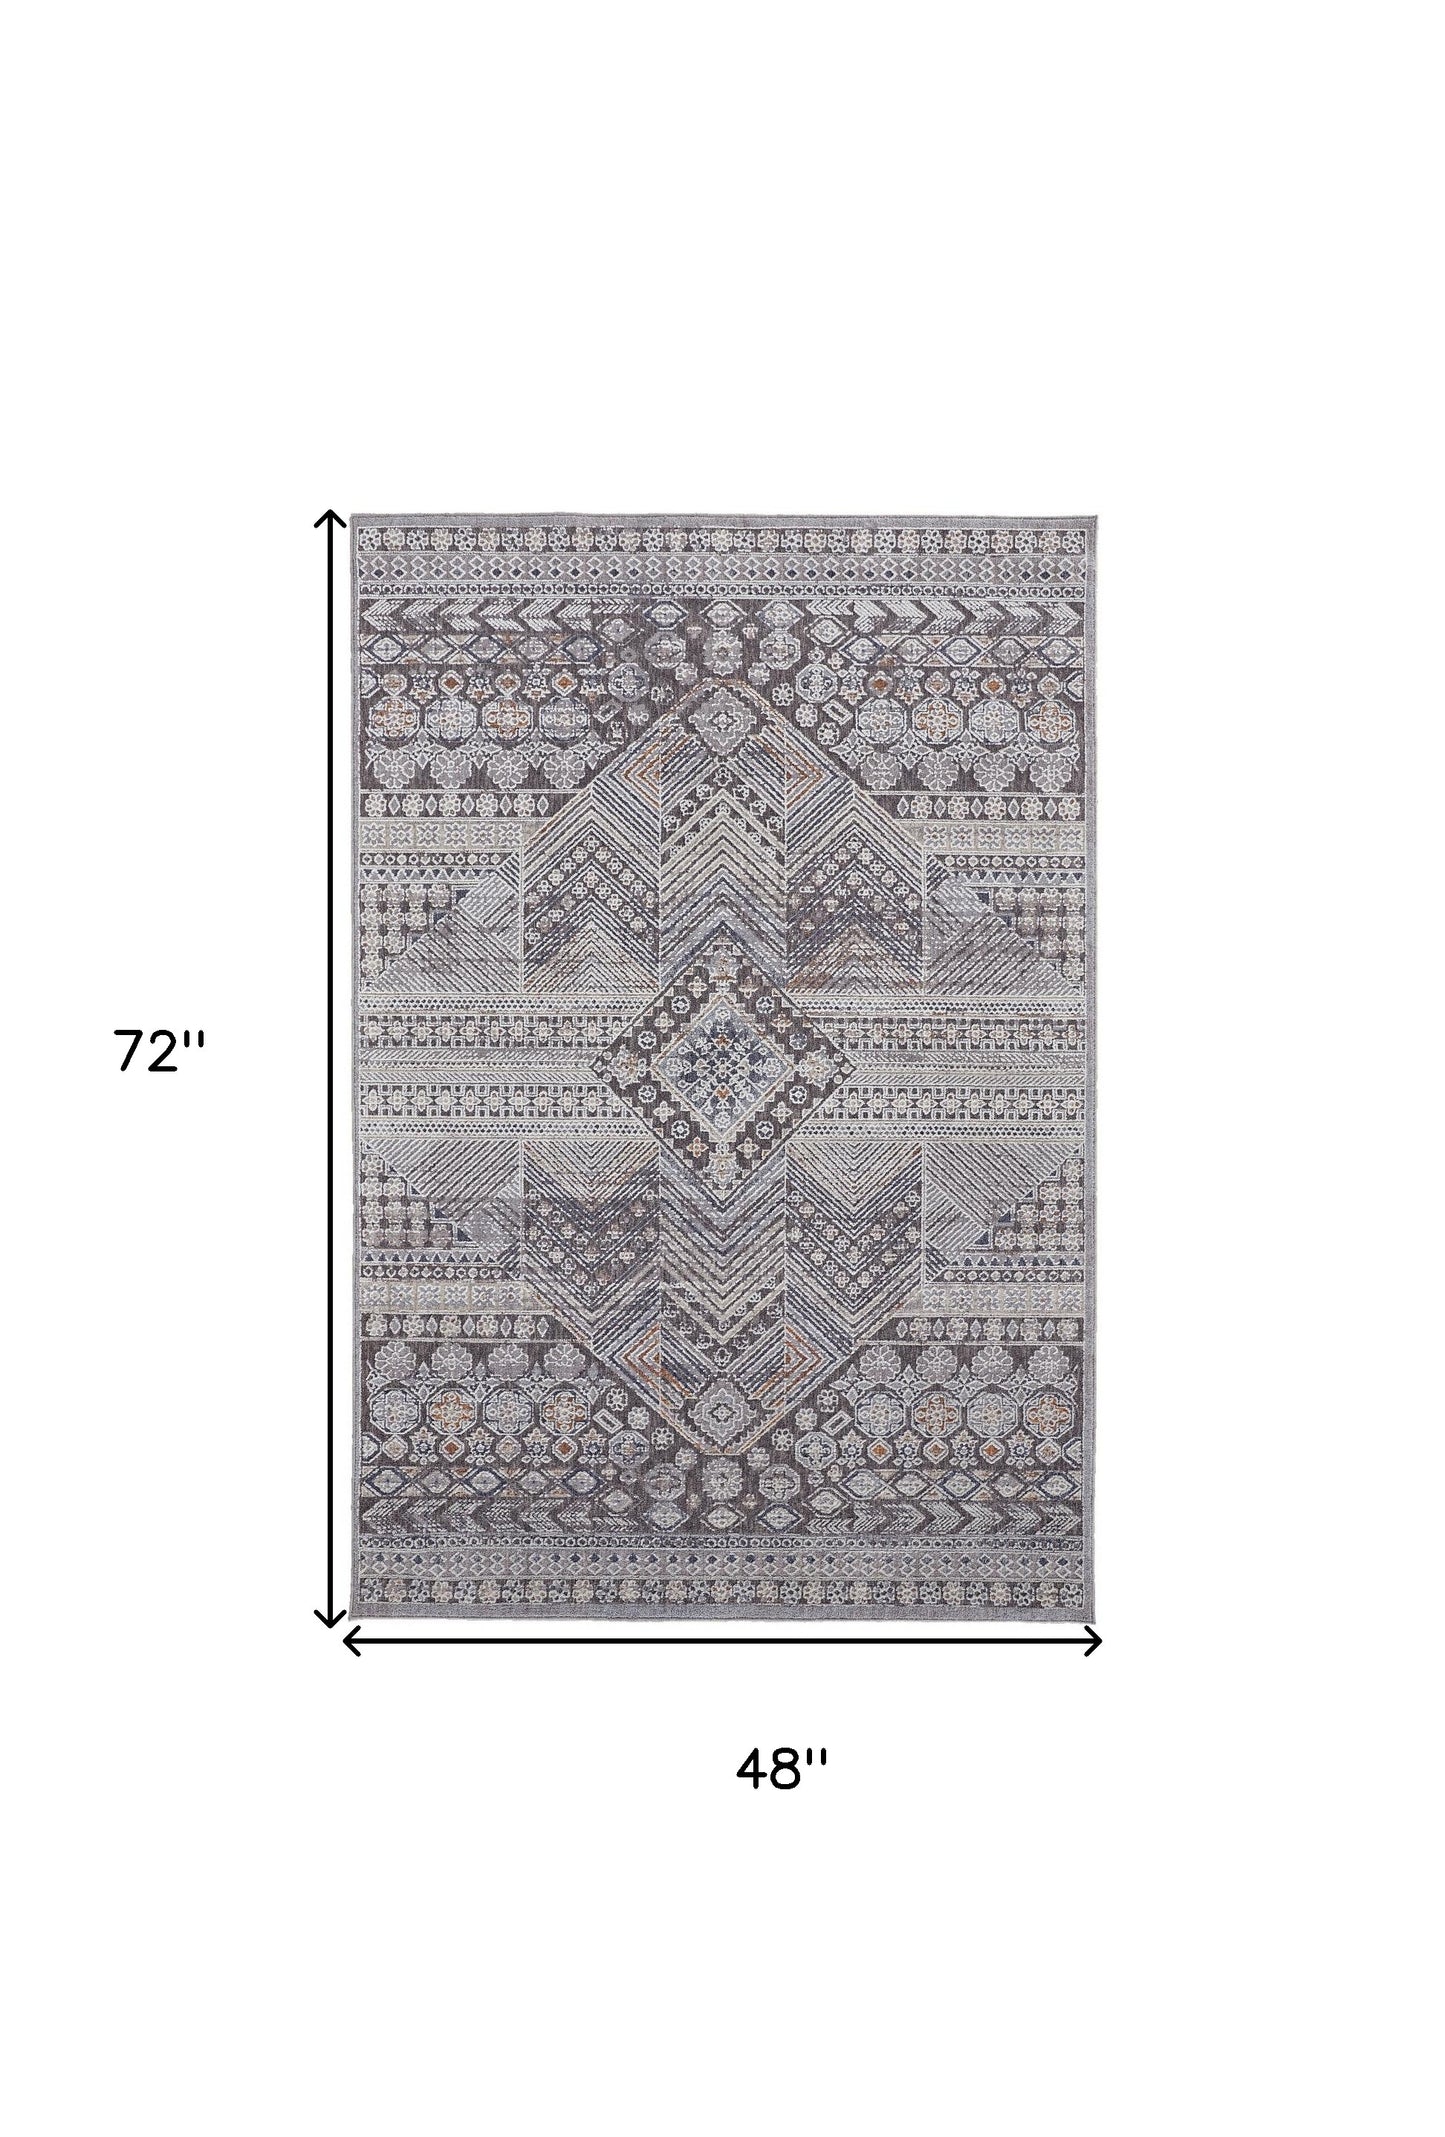 8' X 10' Ivory And Gray Geometric Power Loom Distressed Stain Resistant Area Rug